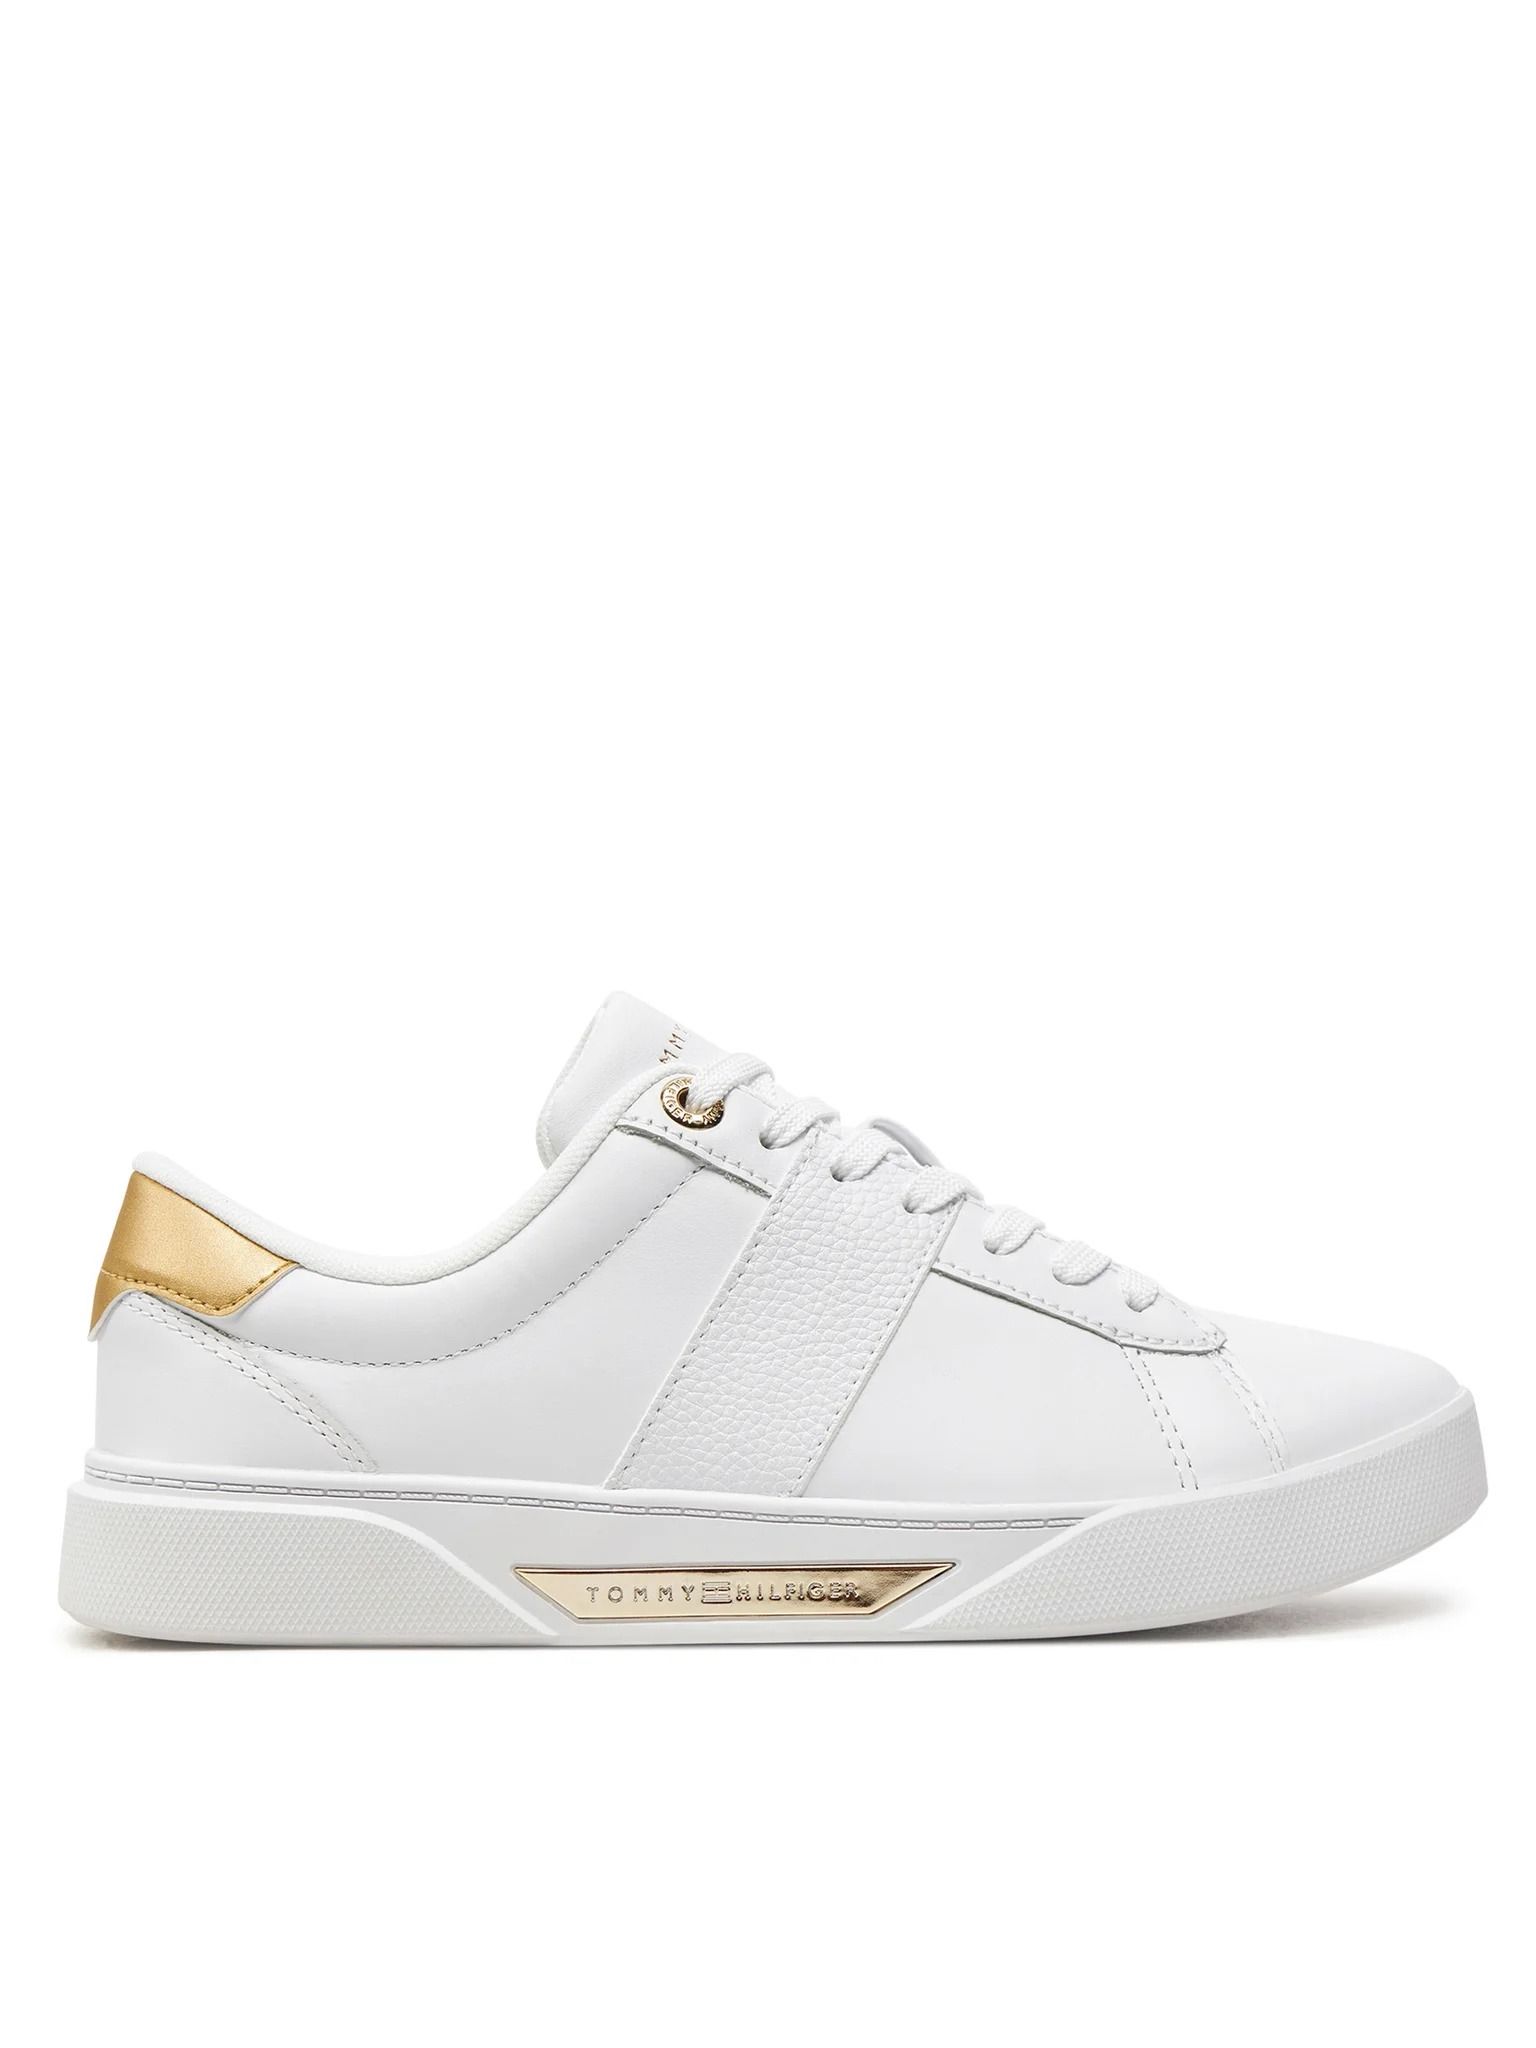 Tommy Hilfiger Chic Panel Court Sneaker